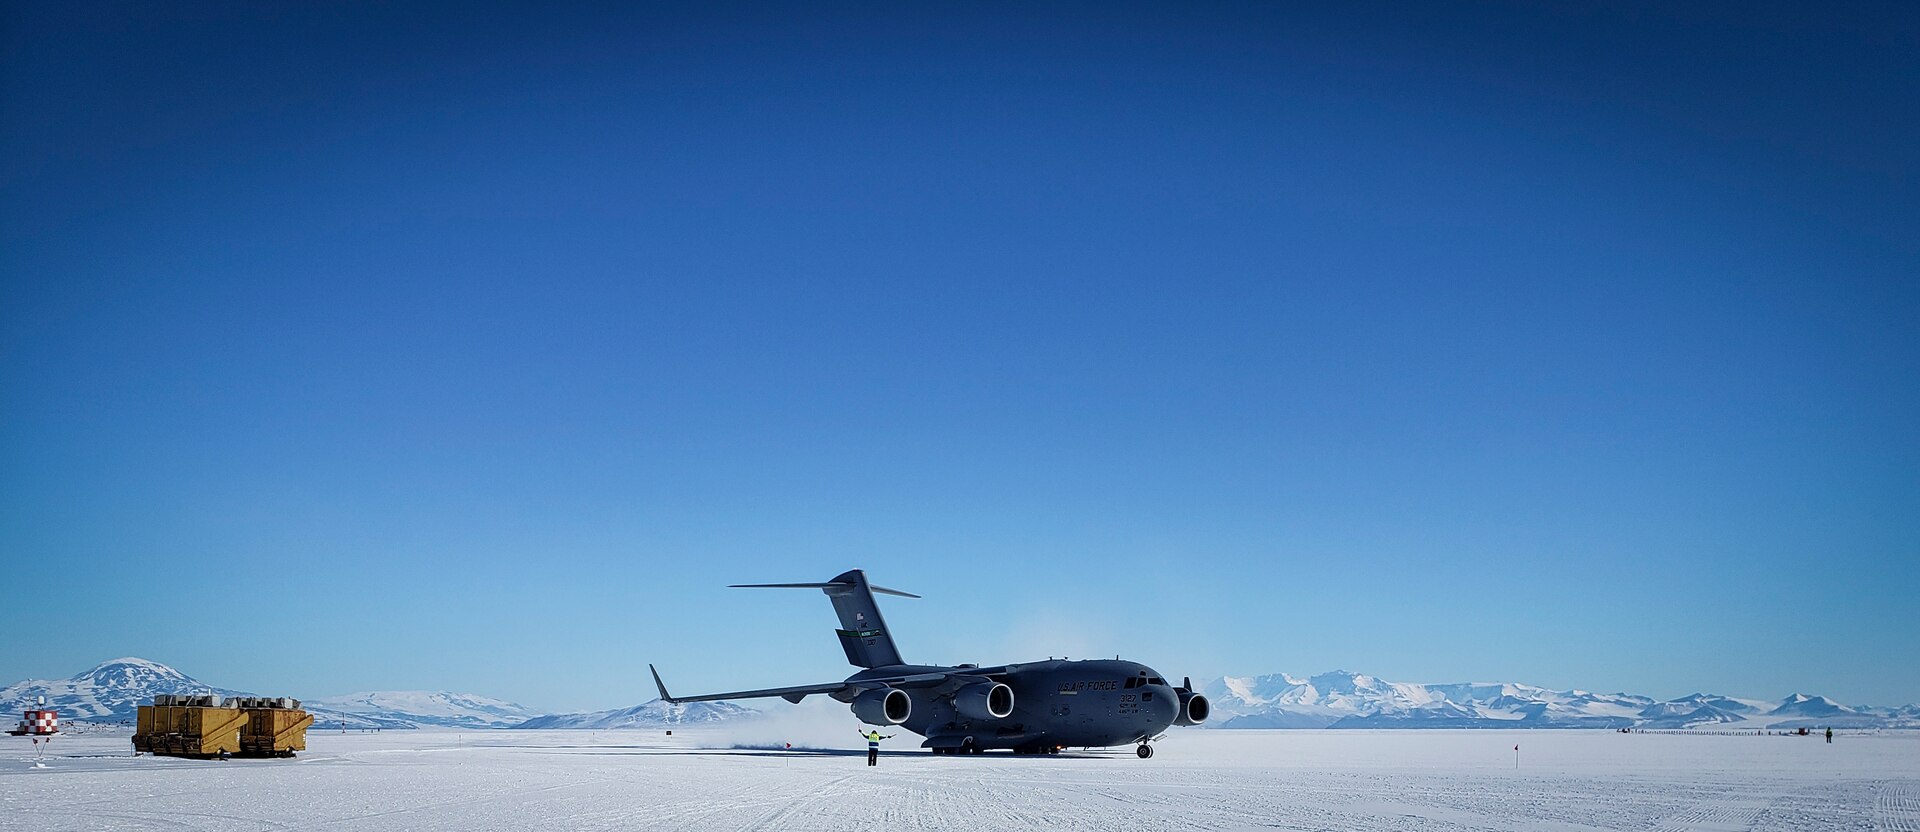 Master Sgt. Justin Rogers, occupational safety specialist, 108th Wing, New Jersey Air National Guard, watches as a C-17 Globemaster arrives at McMurdo Station, Antarctica, Nov. 15, 2019.